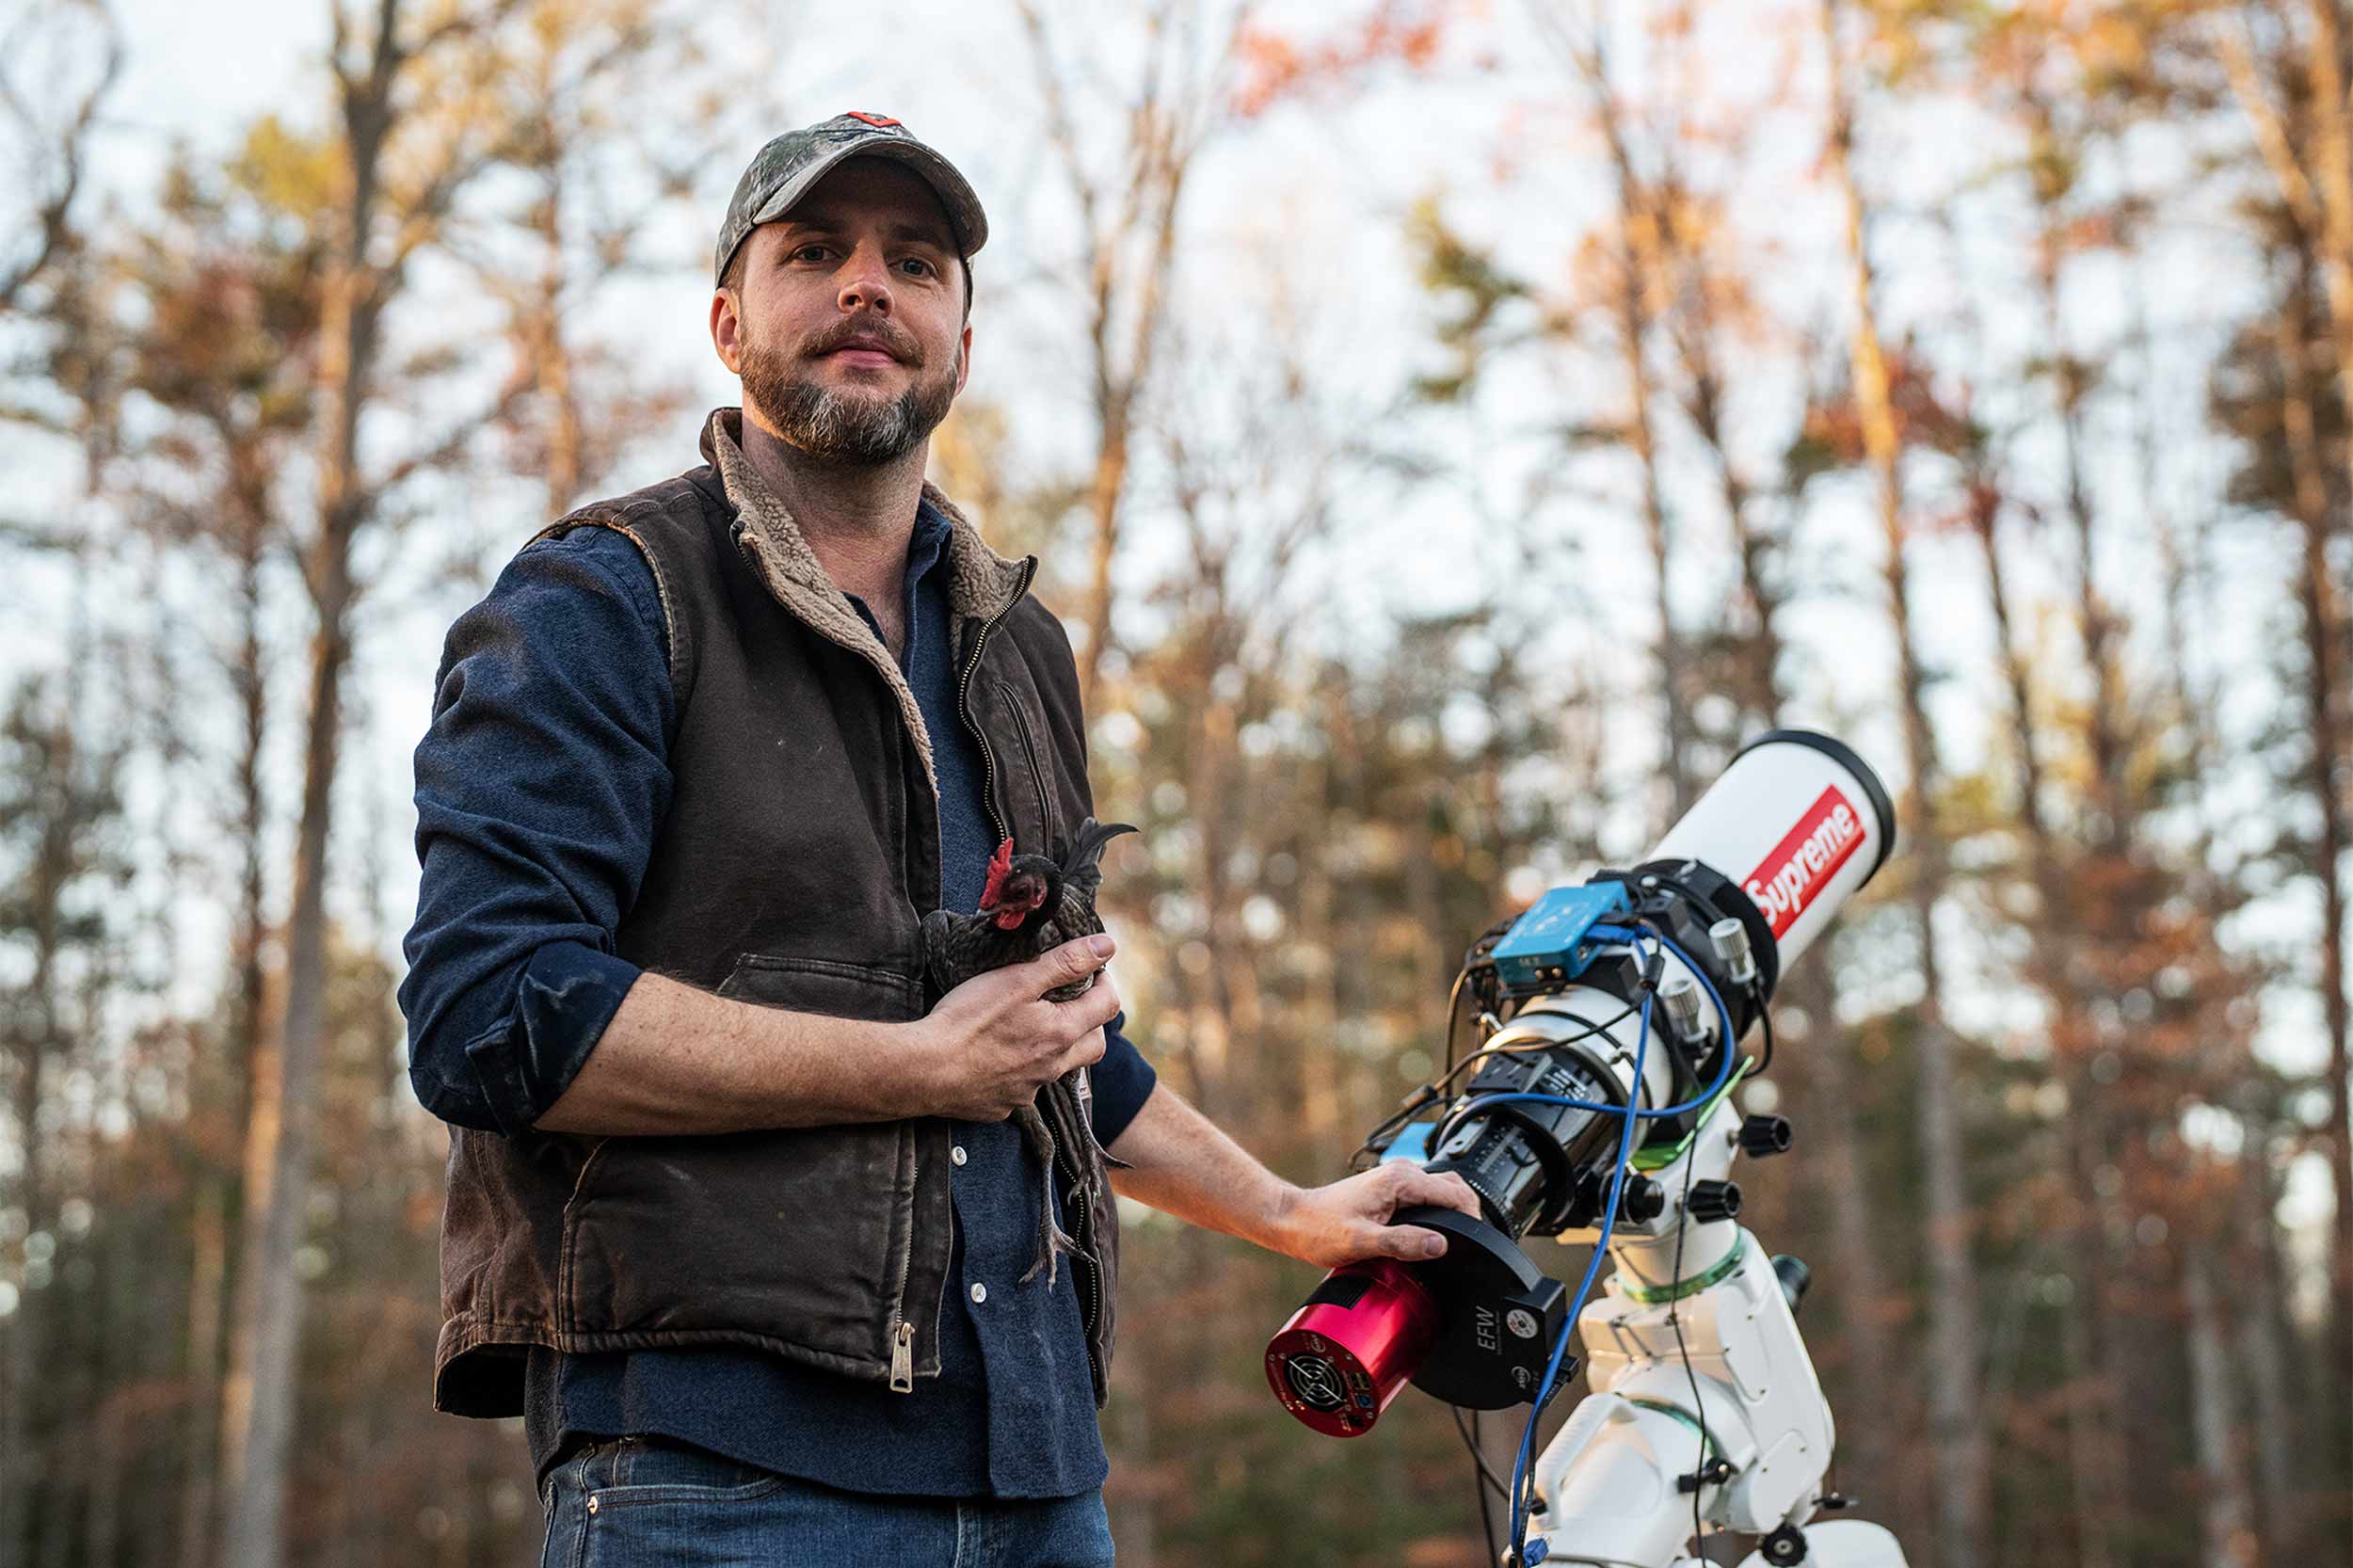 Brennan Gilmore stands in the woods with one hand on a telescope, the other holding a small black chicken